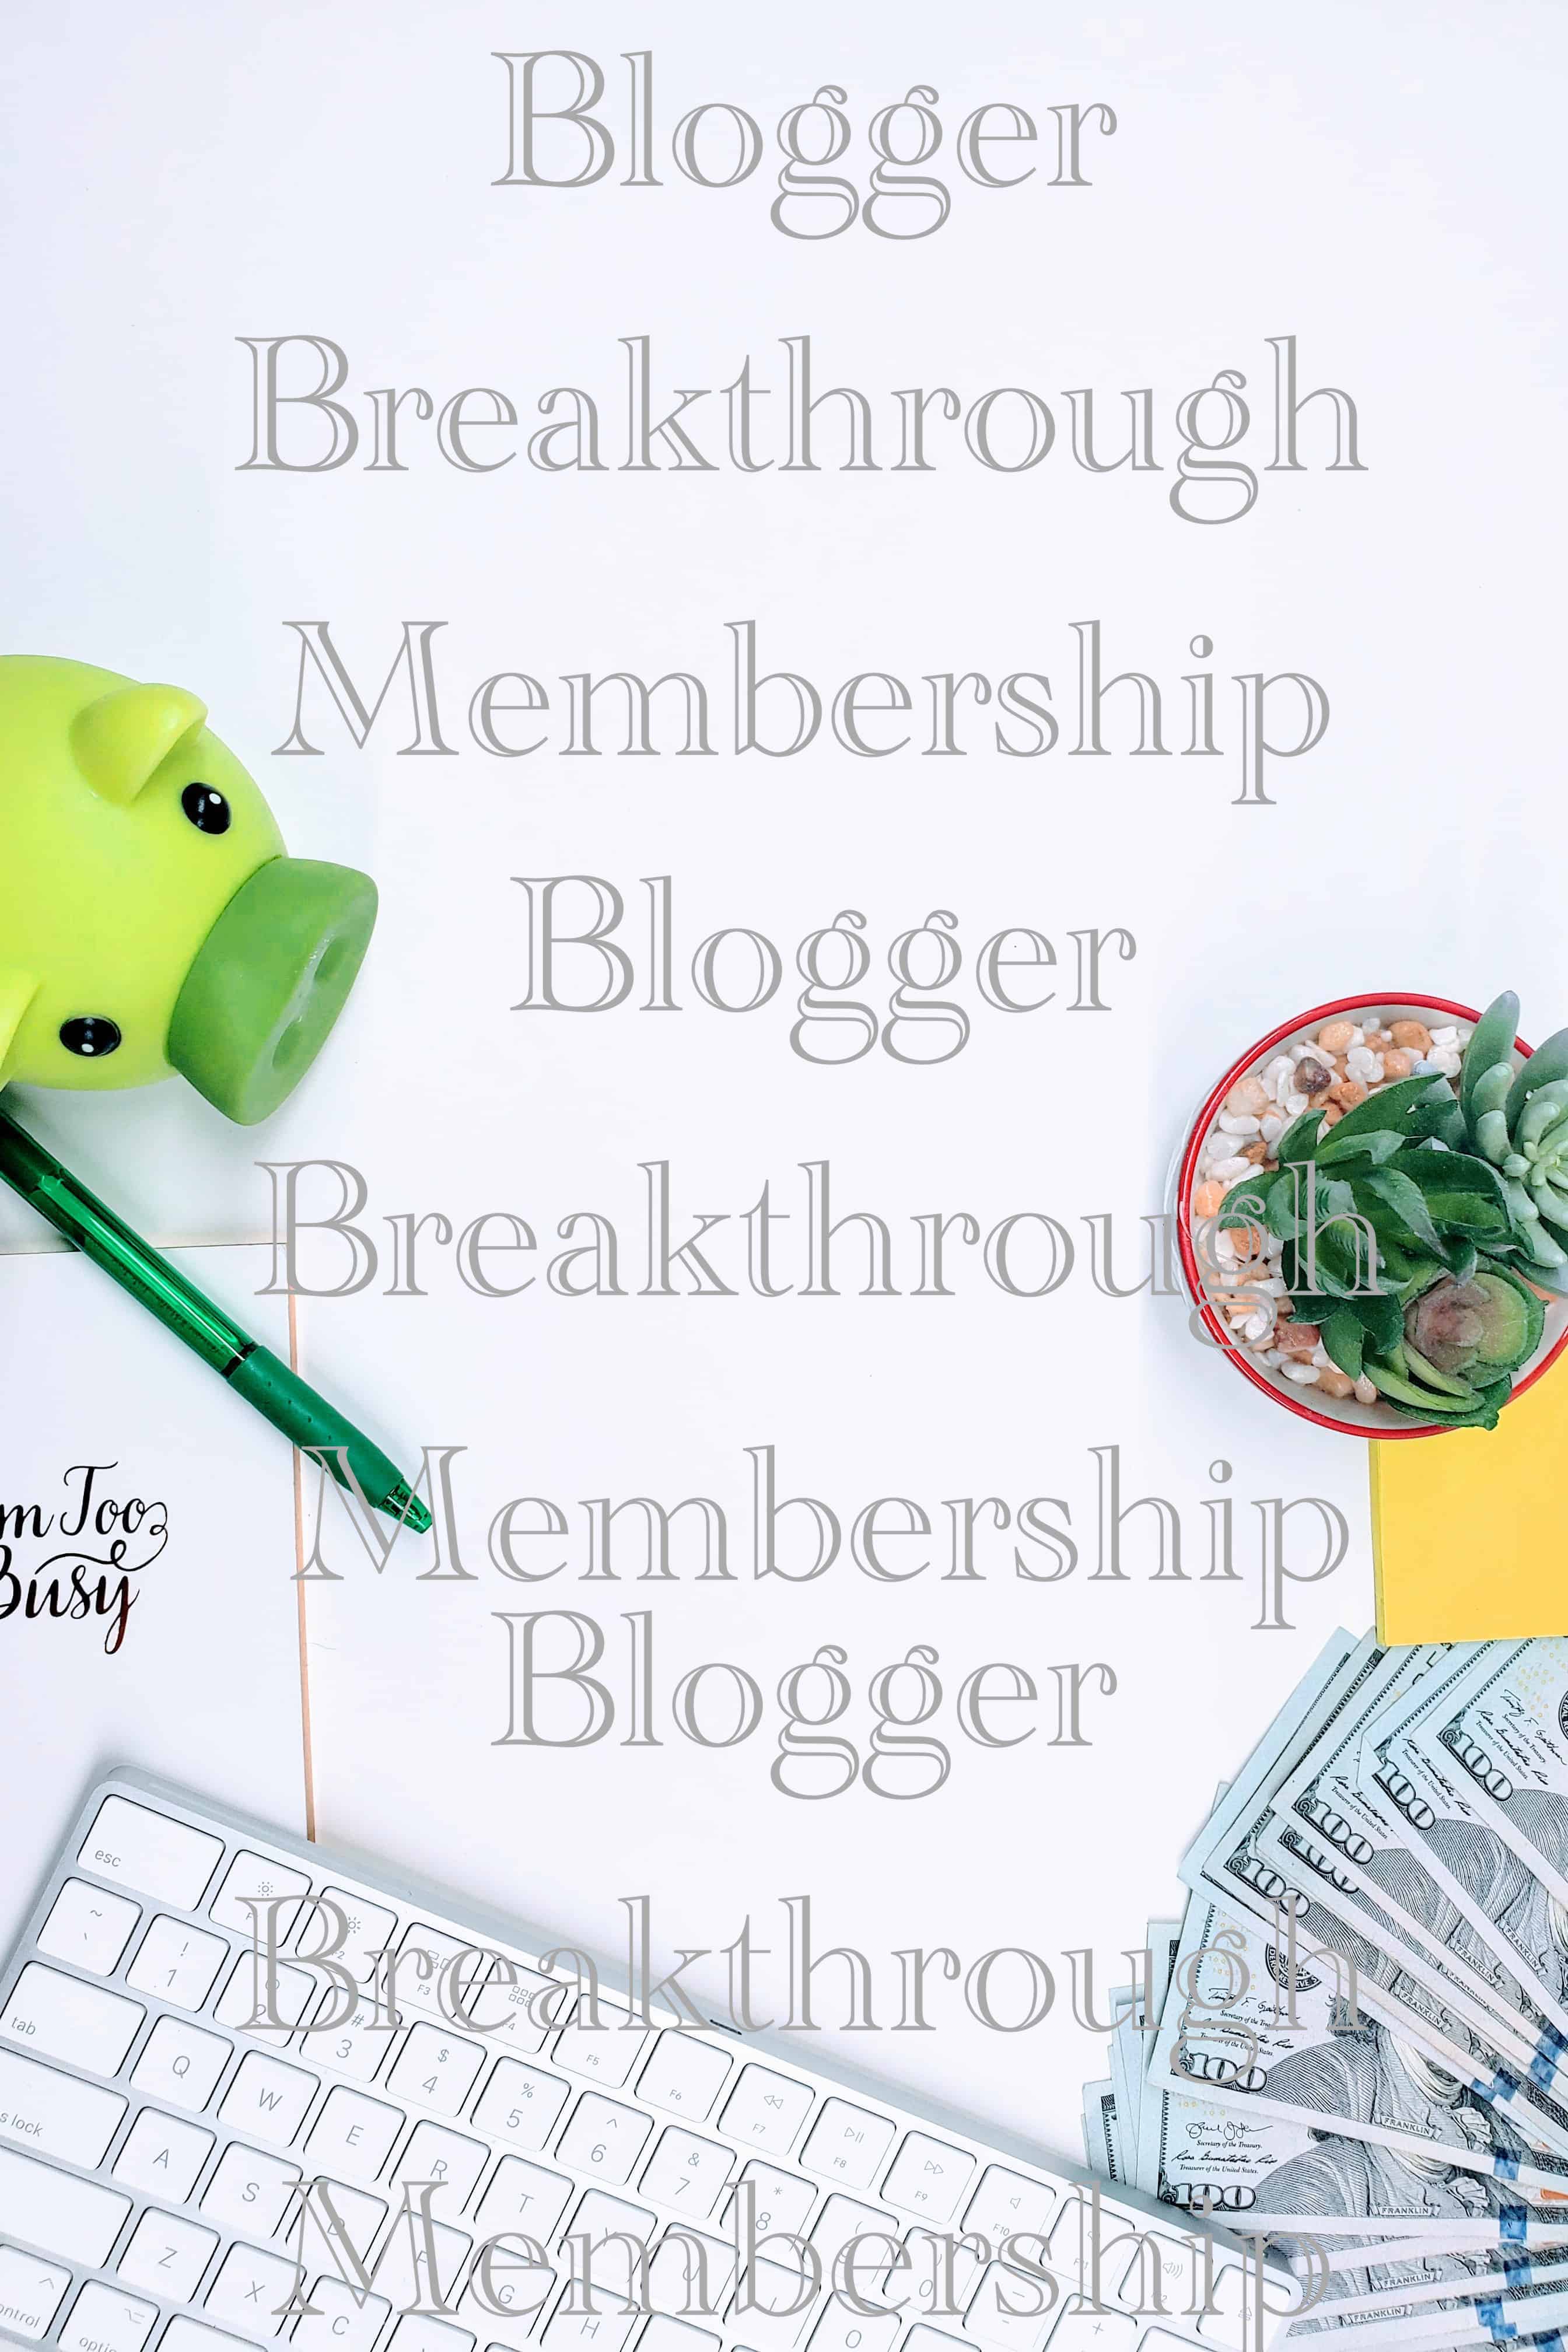 A Blogger Breakthrough Summit financial themed image of a piggy bank and money on a desk, perfect for a blog&